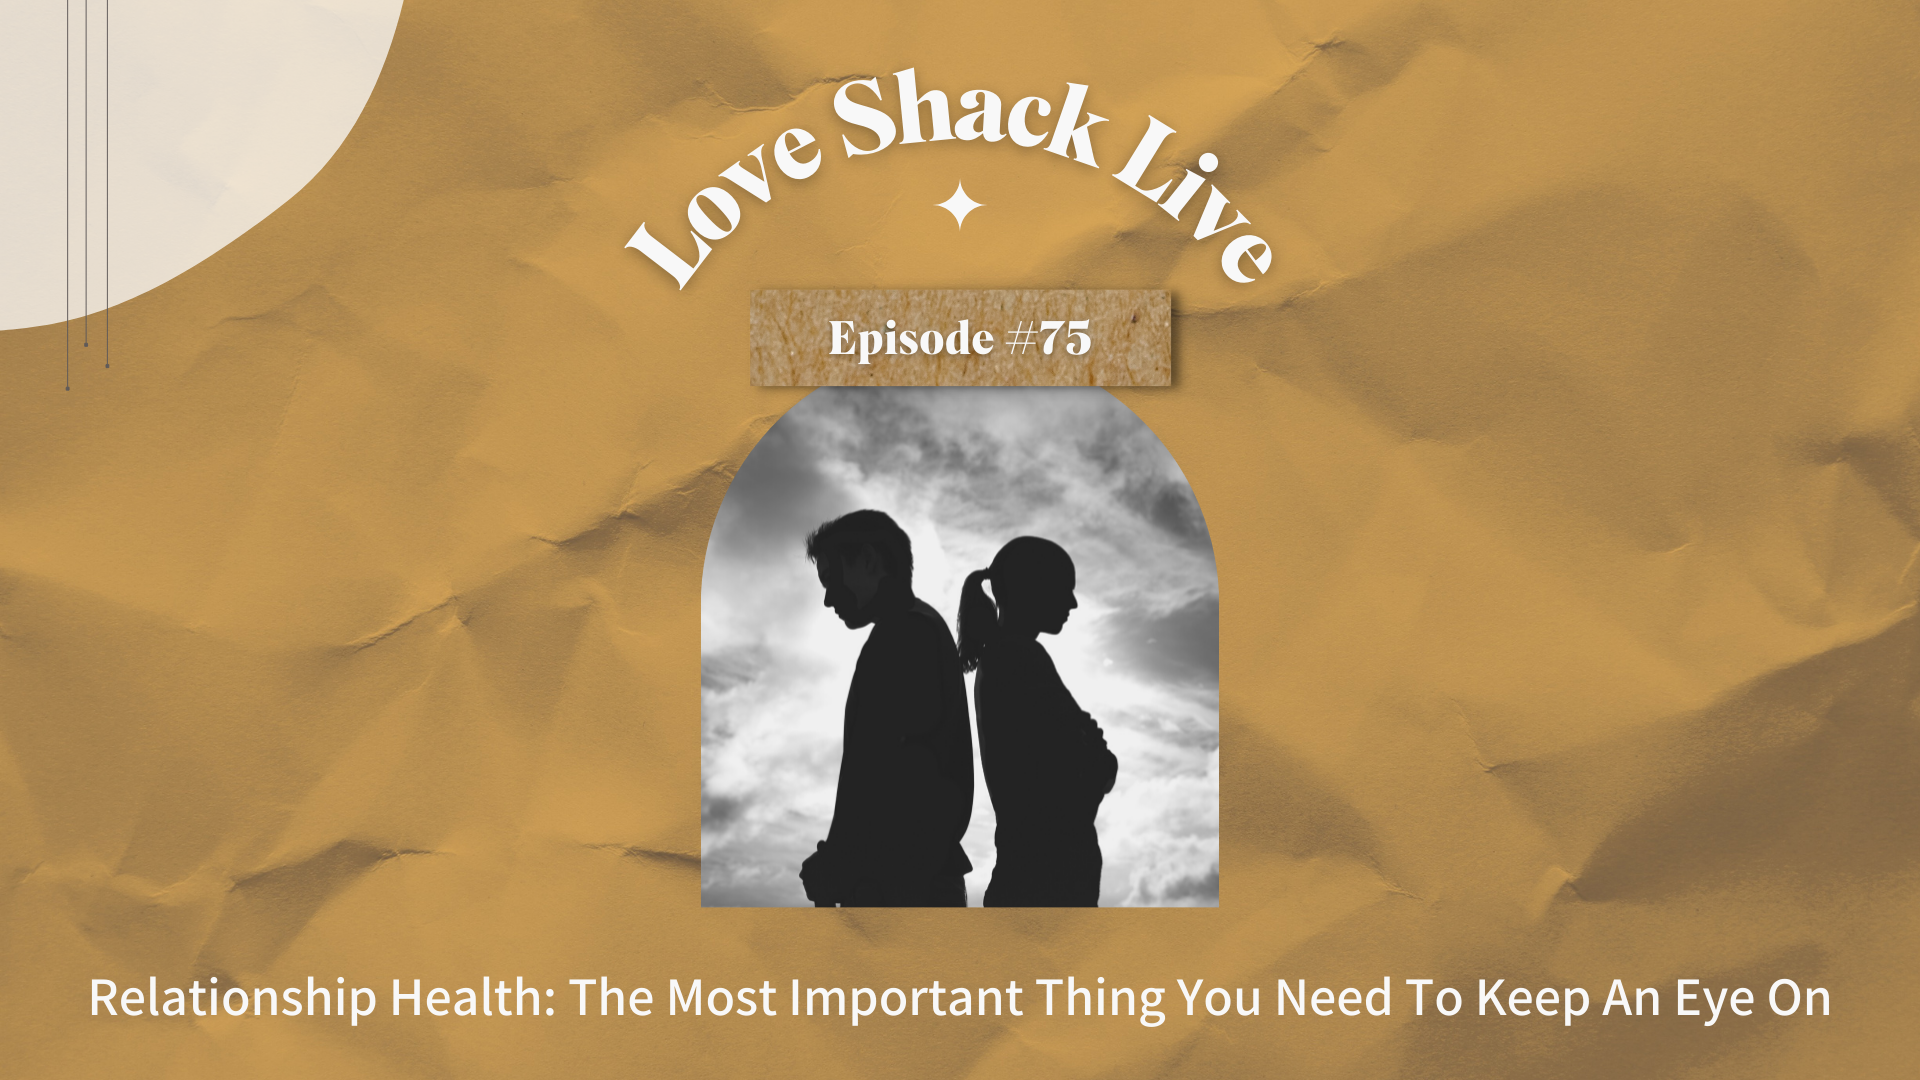 Relationship Health: The Most Important Thing You Need To Keep An Eye On